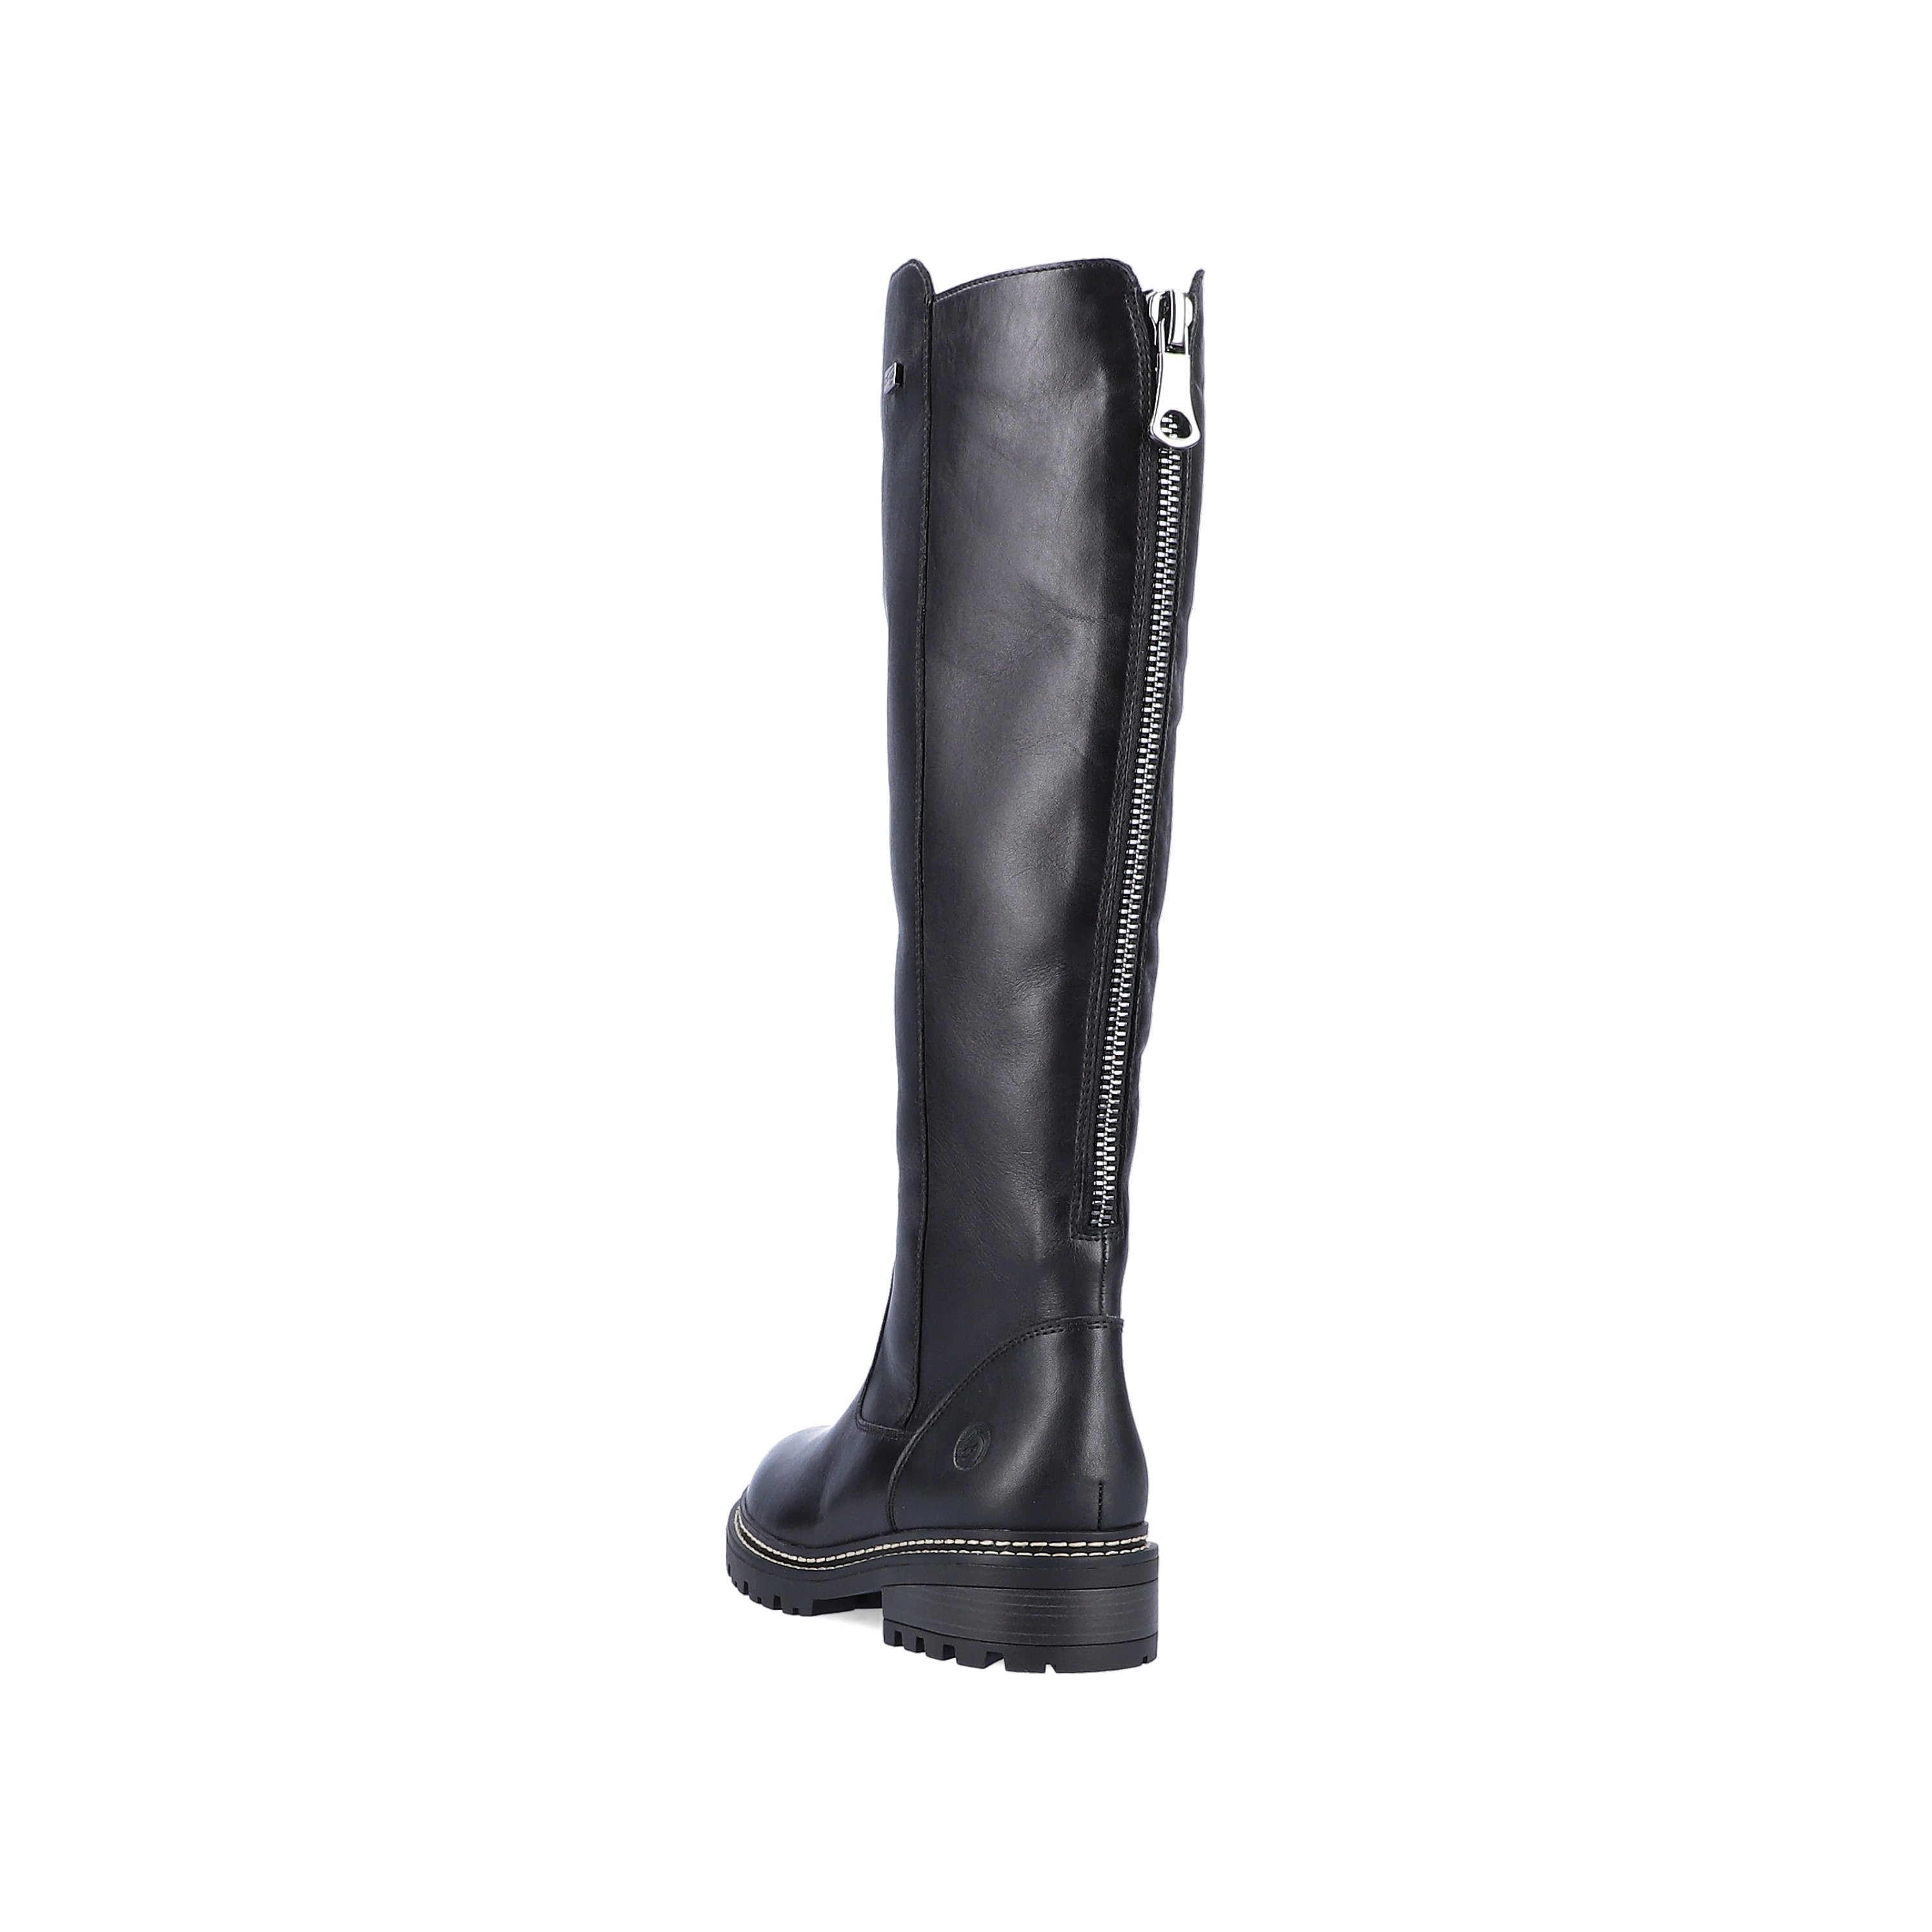 Asphalt black remonte women´s high boots D0B72-01 with cushioning profile sole. Shoe from the back